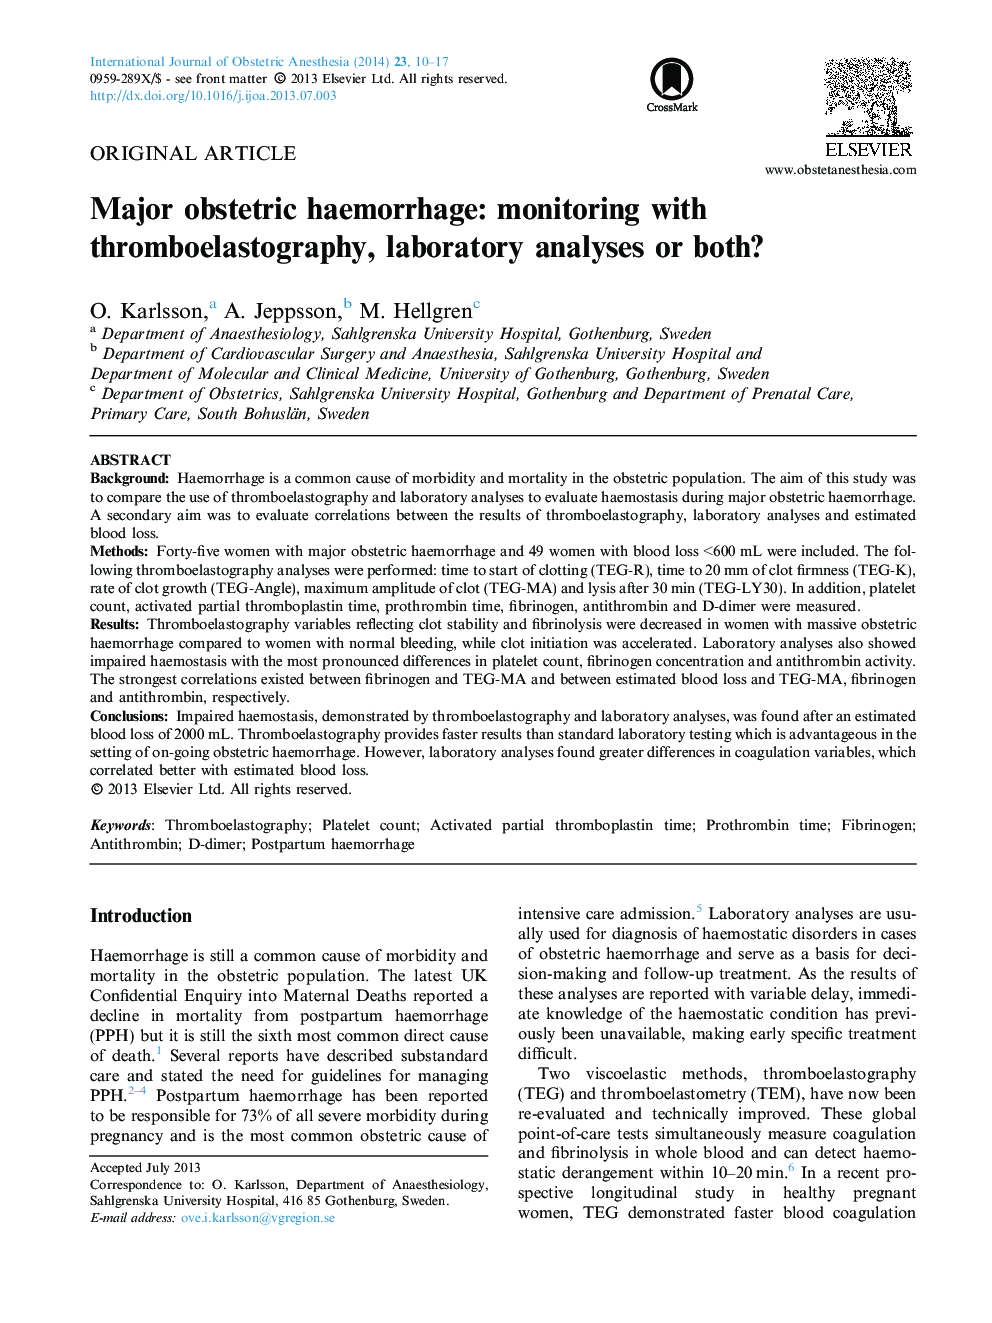 Major obstetric haemorrhage: monitoring with thromboelastography, laboratory analyses or both?